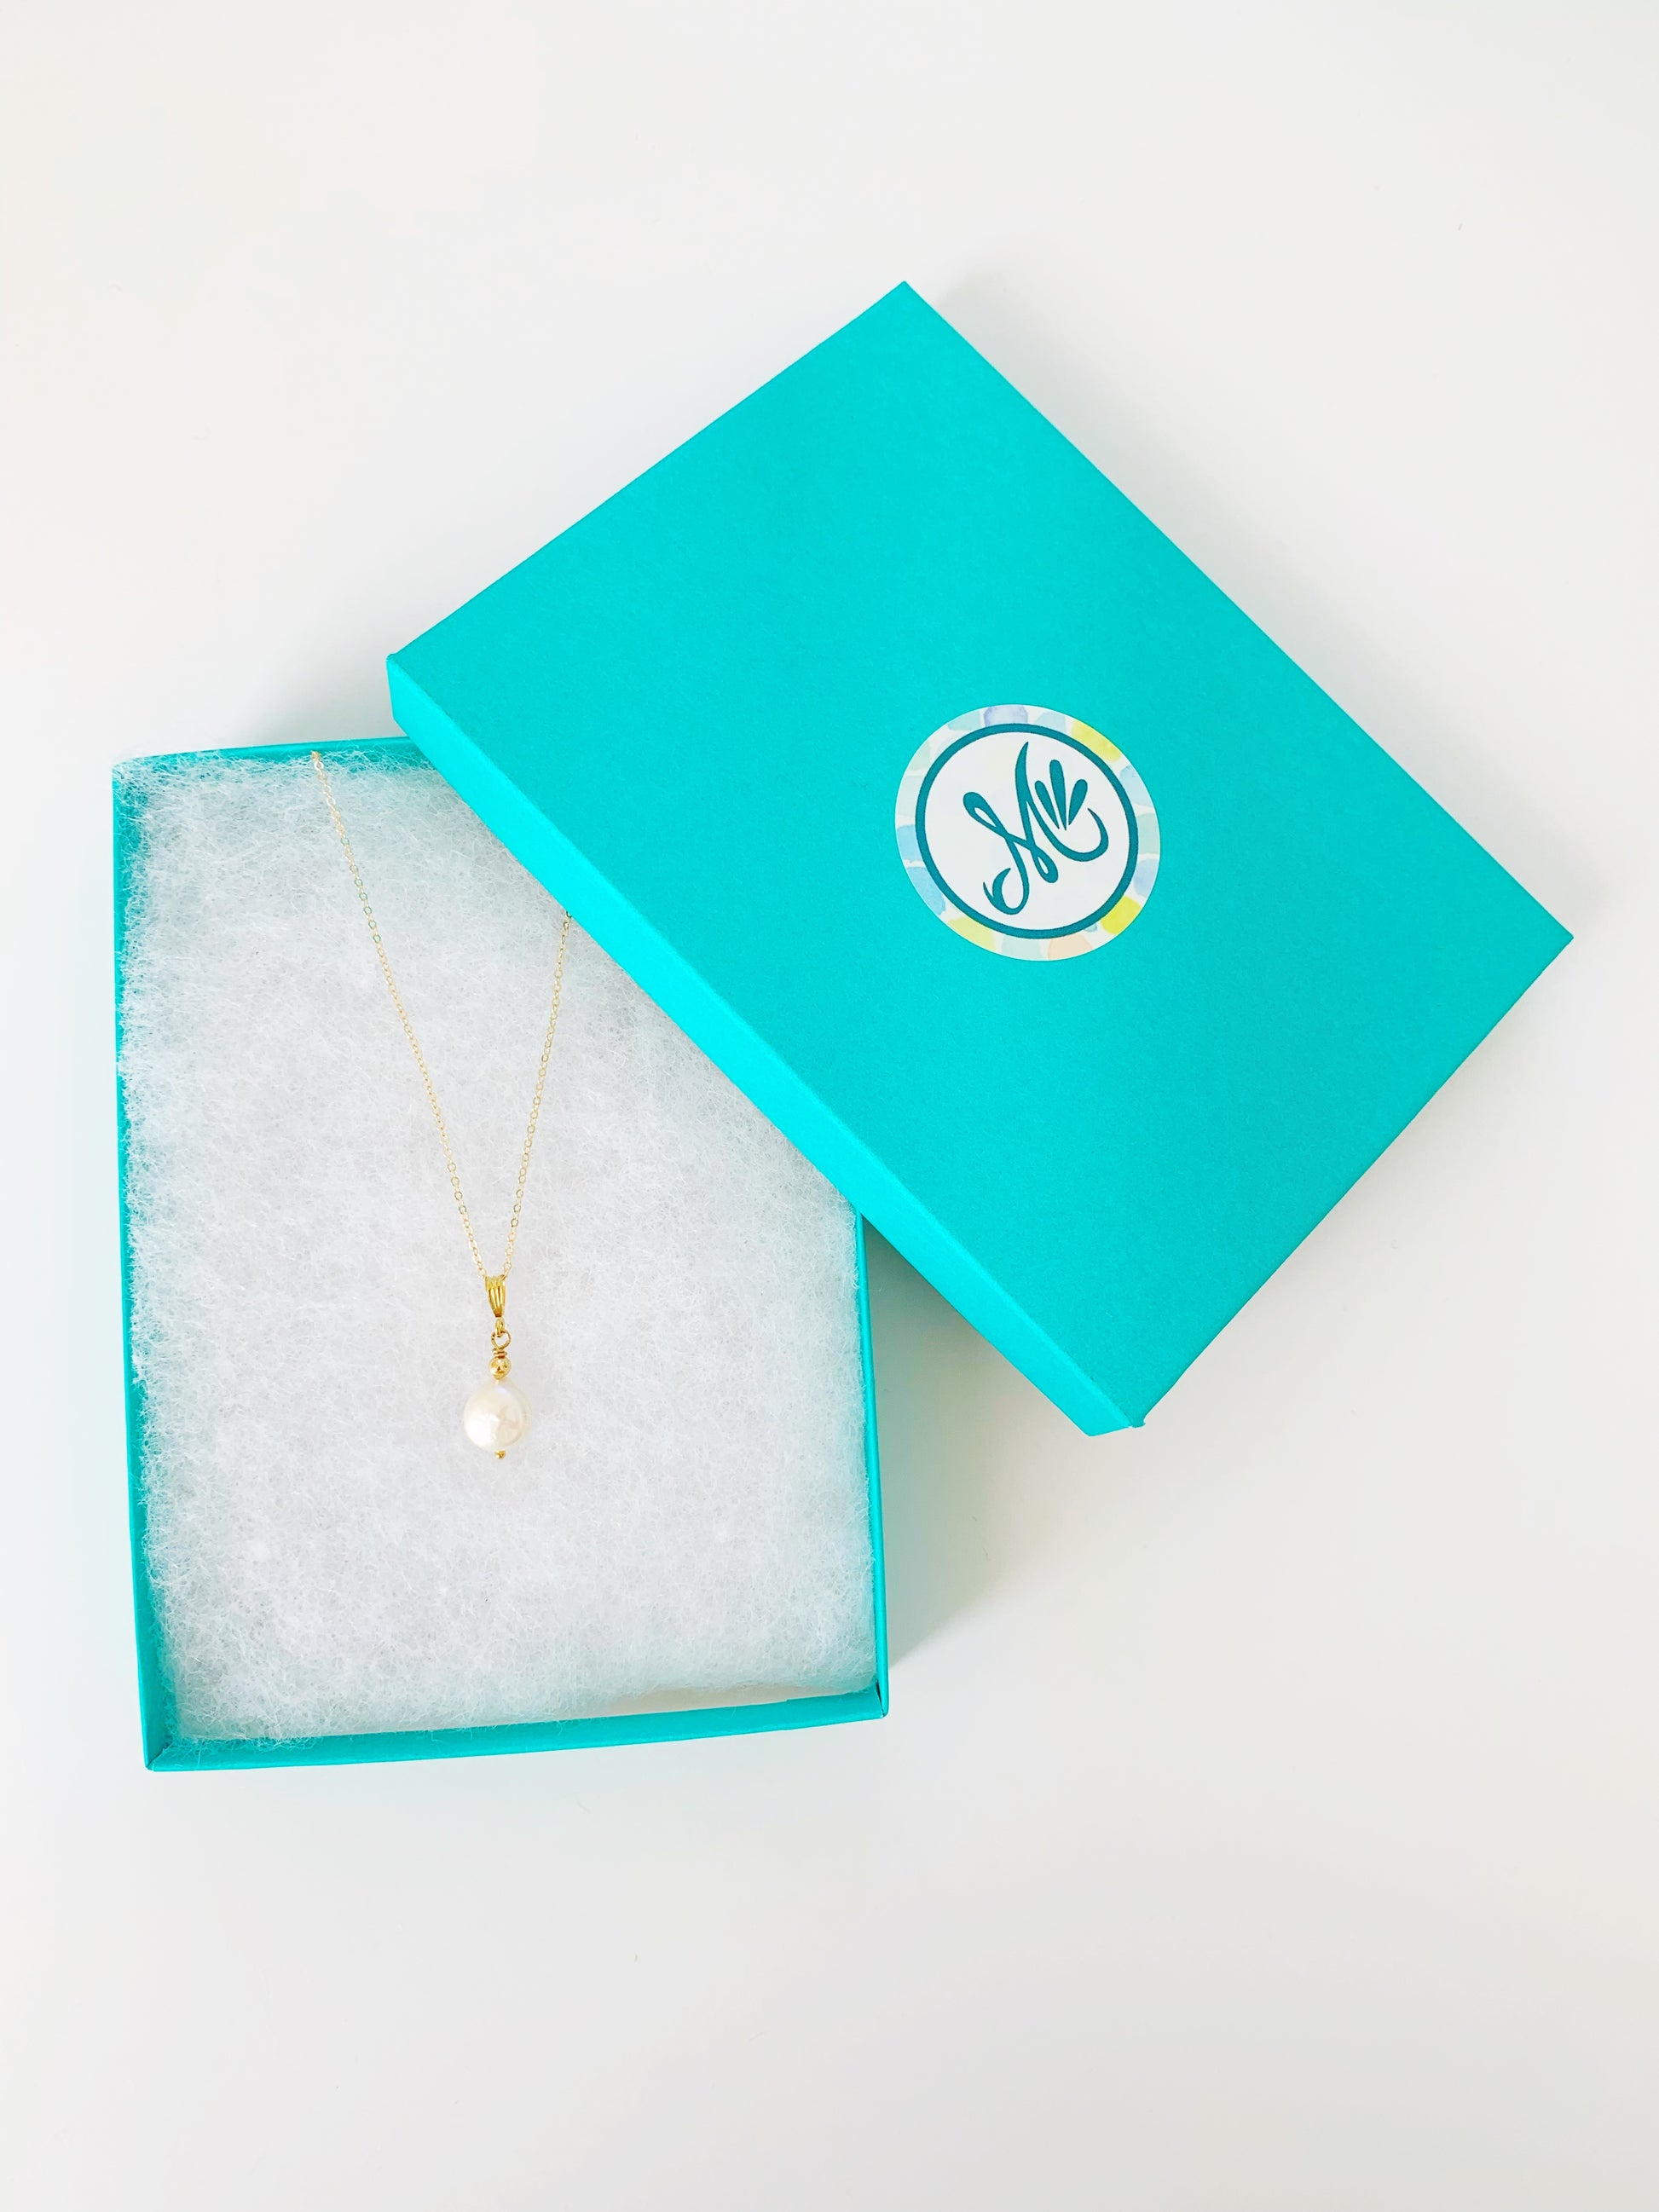 Newport freshwater coin pearl with 14k gold filled chain and findings pictured here in a cotton lined teal gift box on a white table